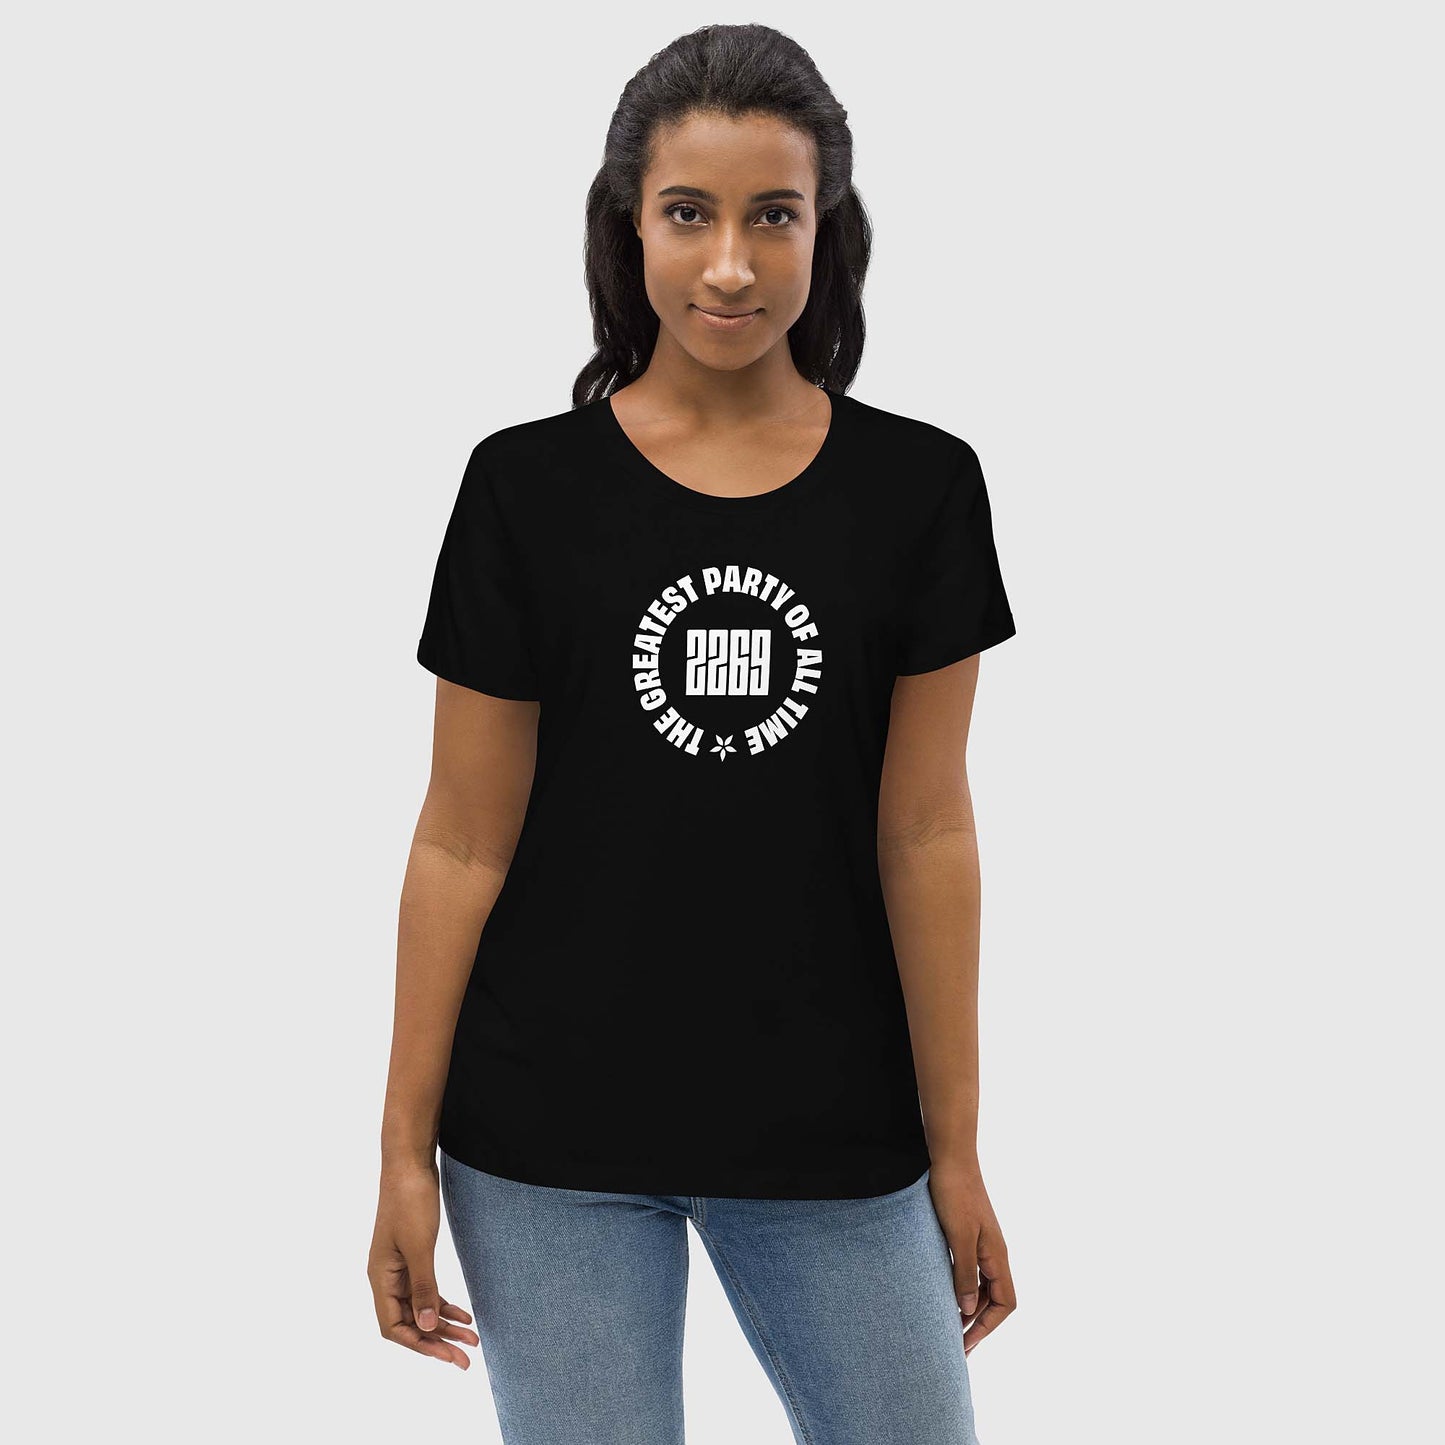 Women's black fitted organic cotton t-shirt with English 2269 party circle